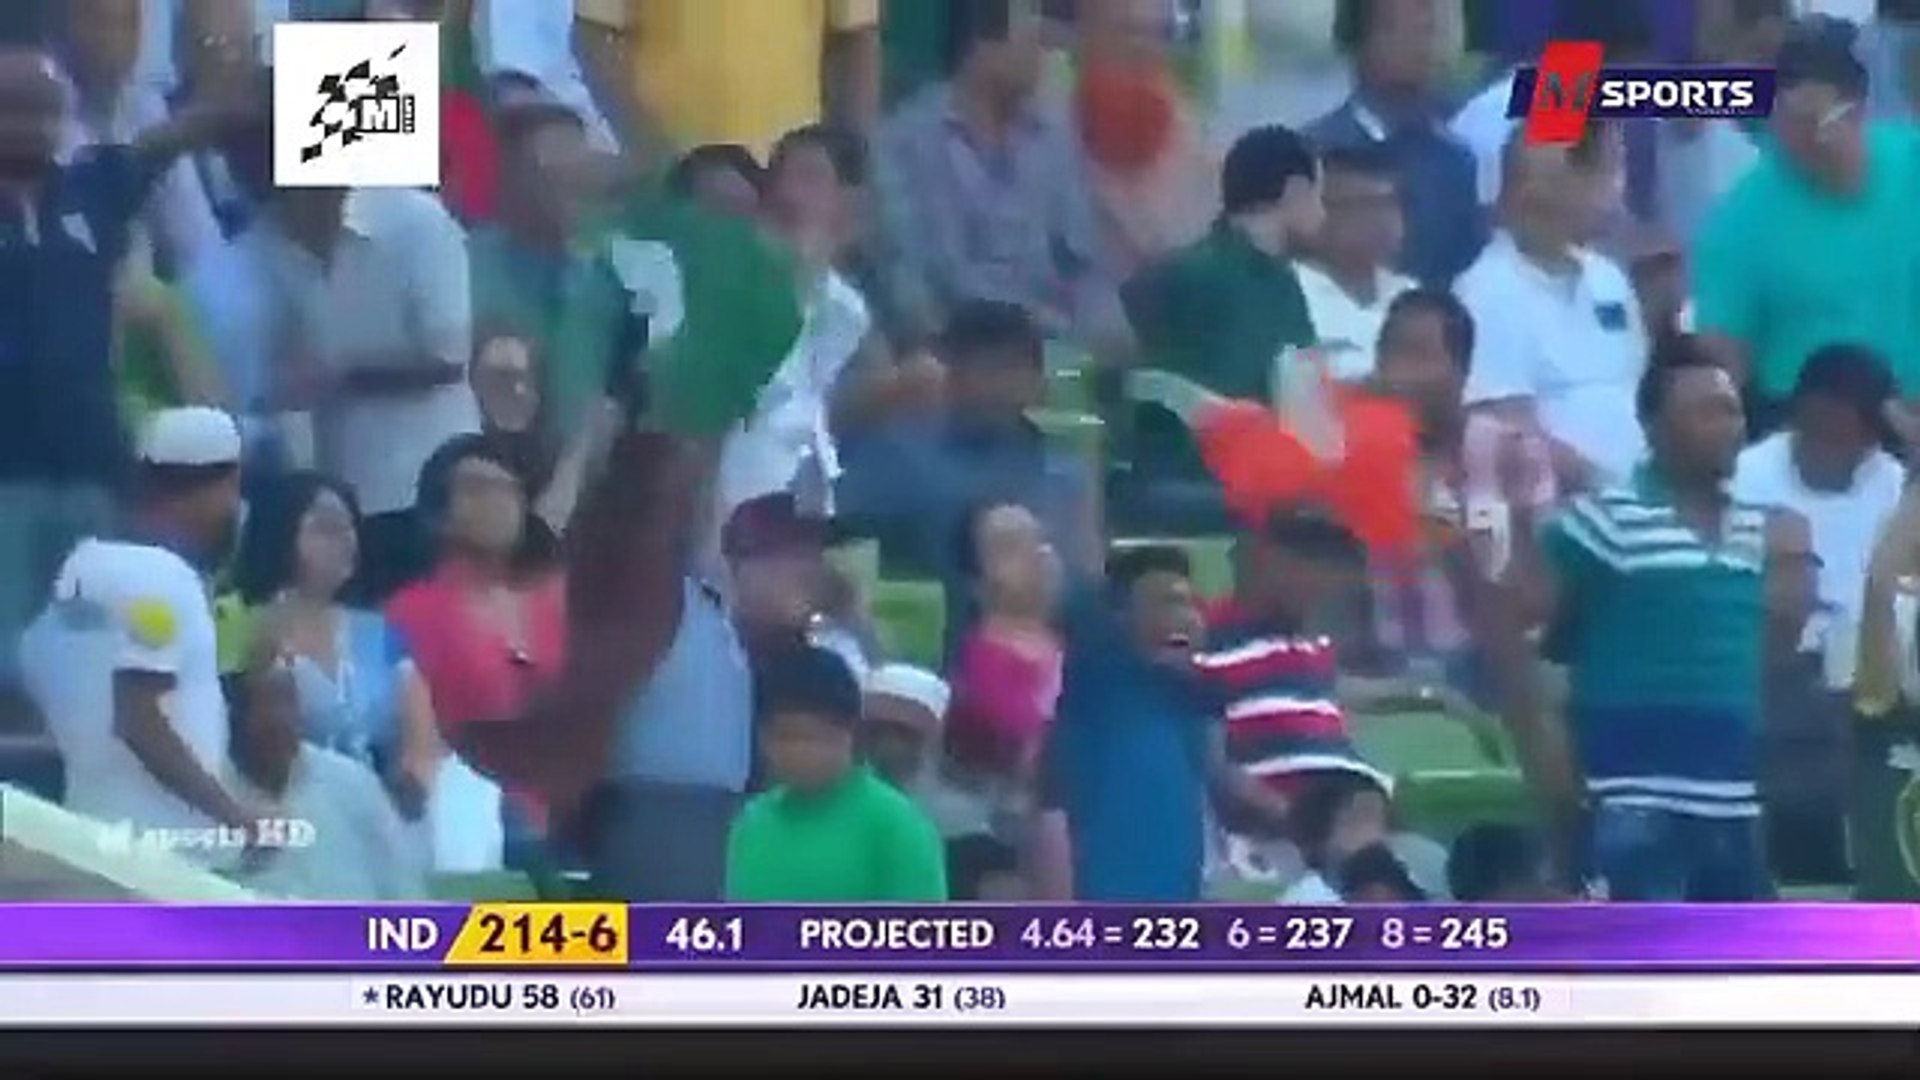 Pakistan vs India highlights Asia cup 2014 | pak vs ind cricket match highlights